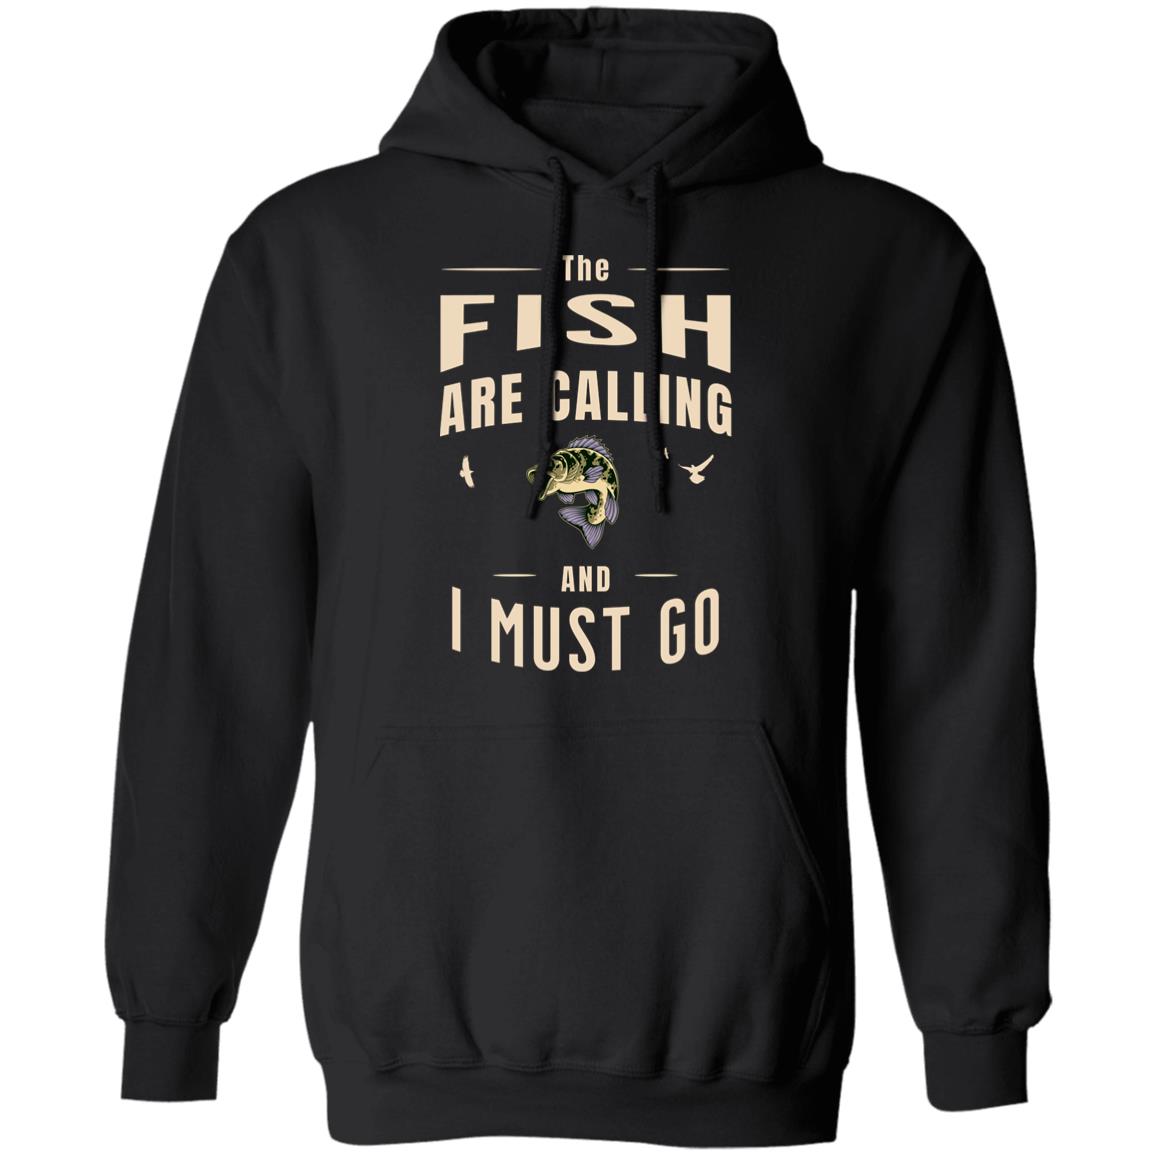 The fish are calling and i must go-hoodie k black